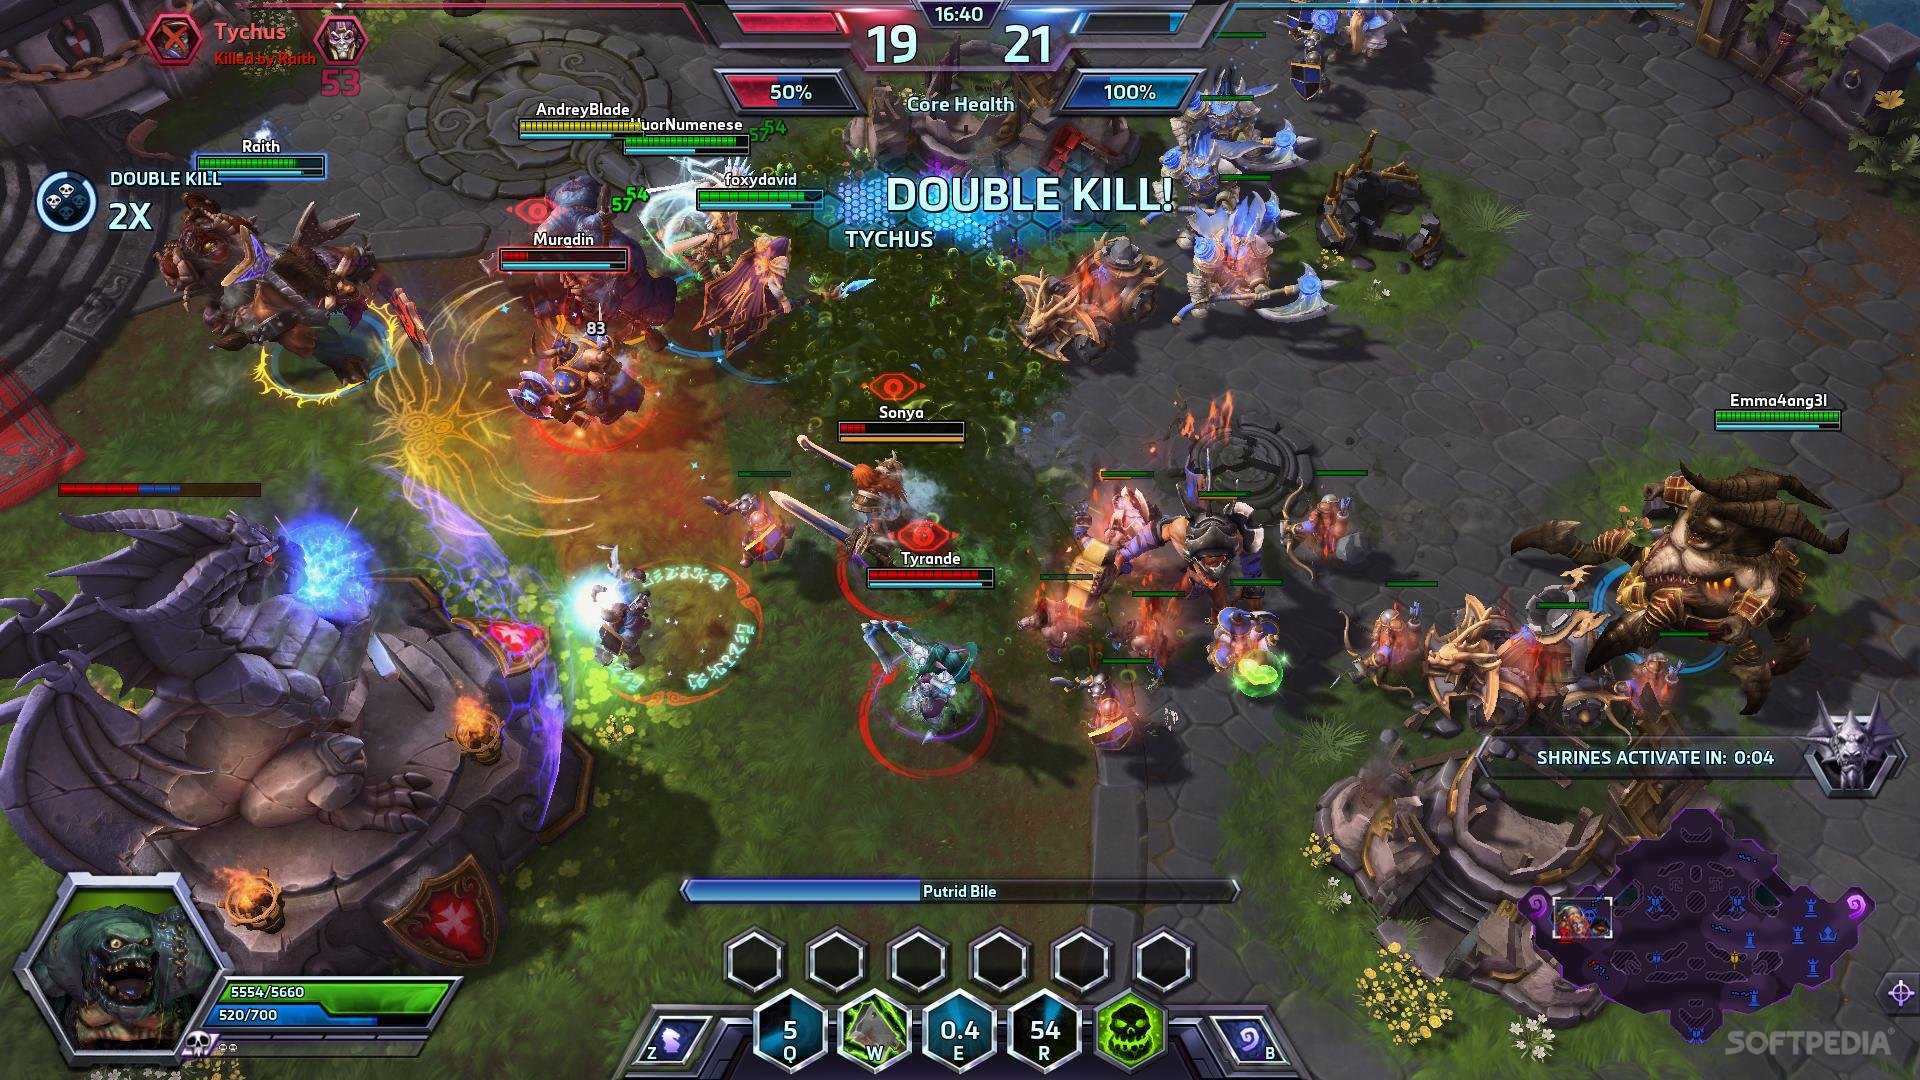 Dome: Heroes of the Storm PC gameplay #1 - character selection (60